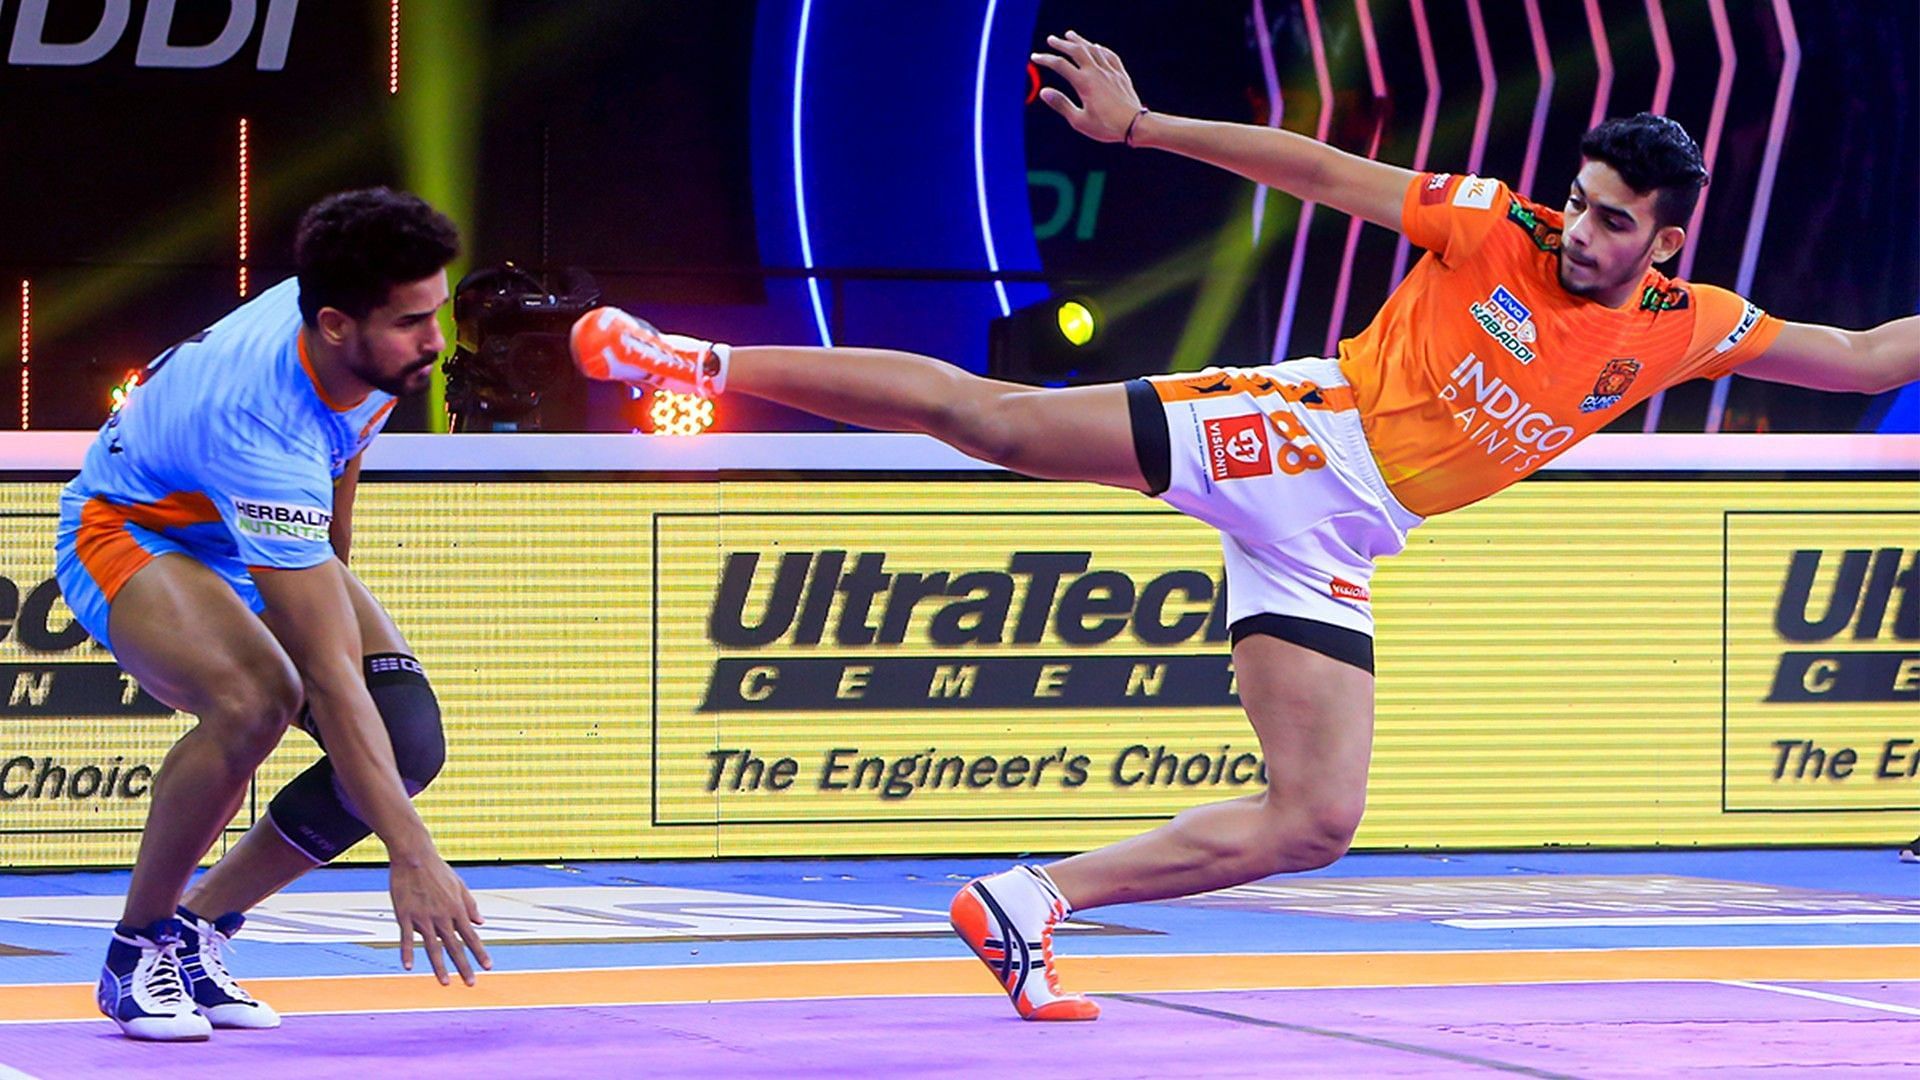 Puneri Paltan defeated Bengal Warriors by 12 points in the first match that happened on January 9, 2022 (Image: Pro Kabaddi/Facebook)